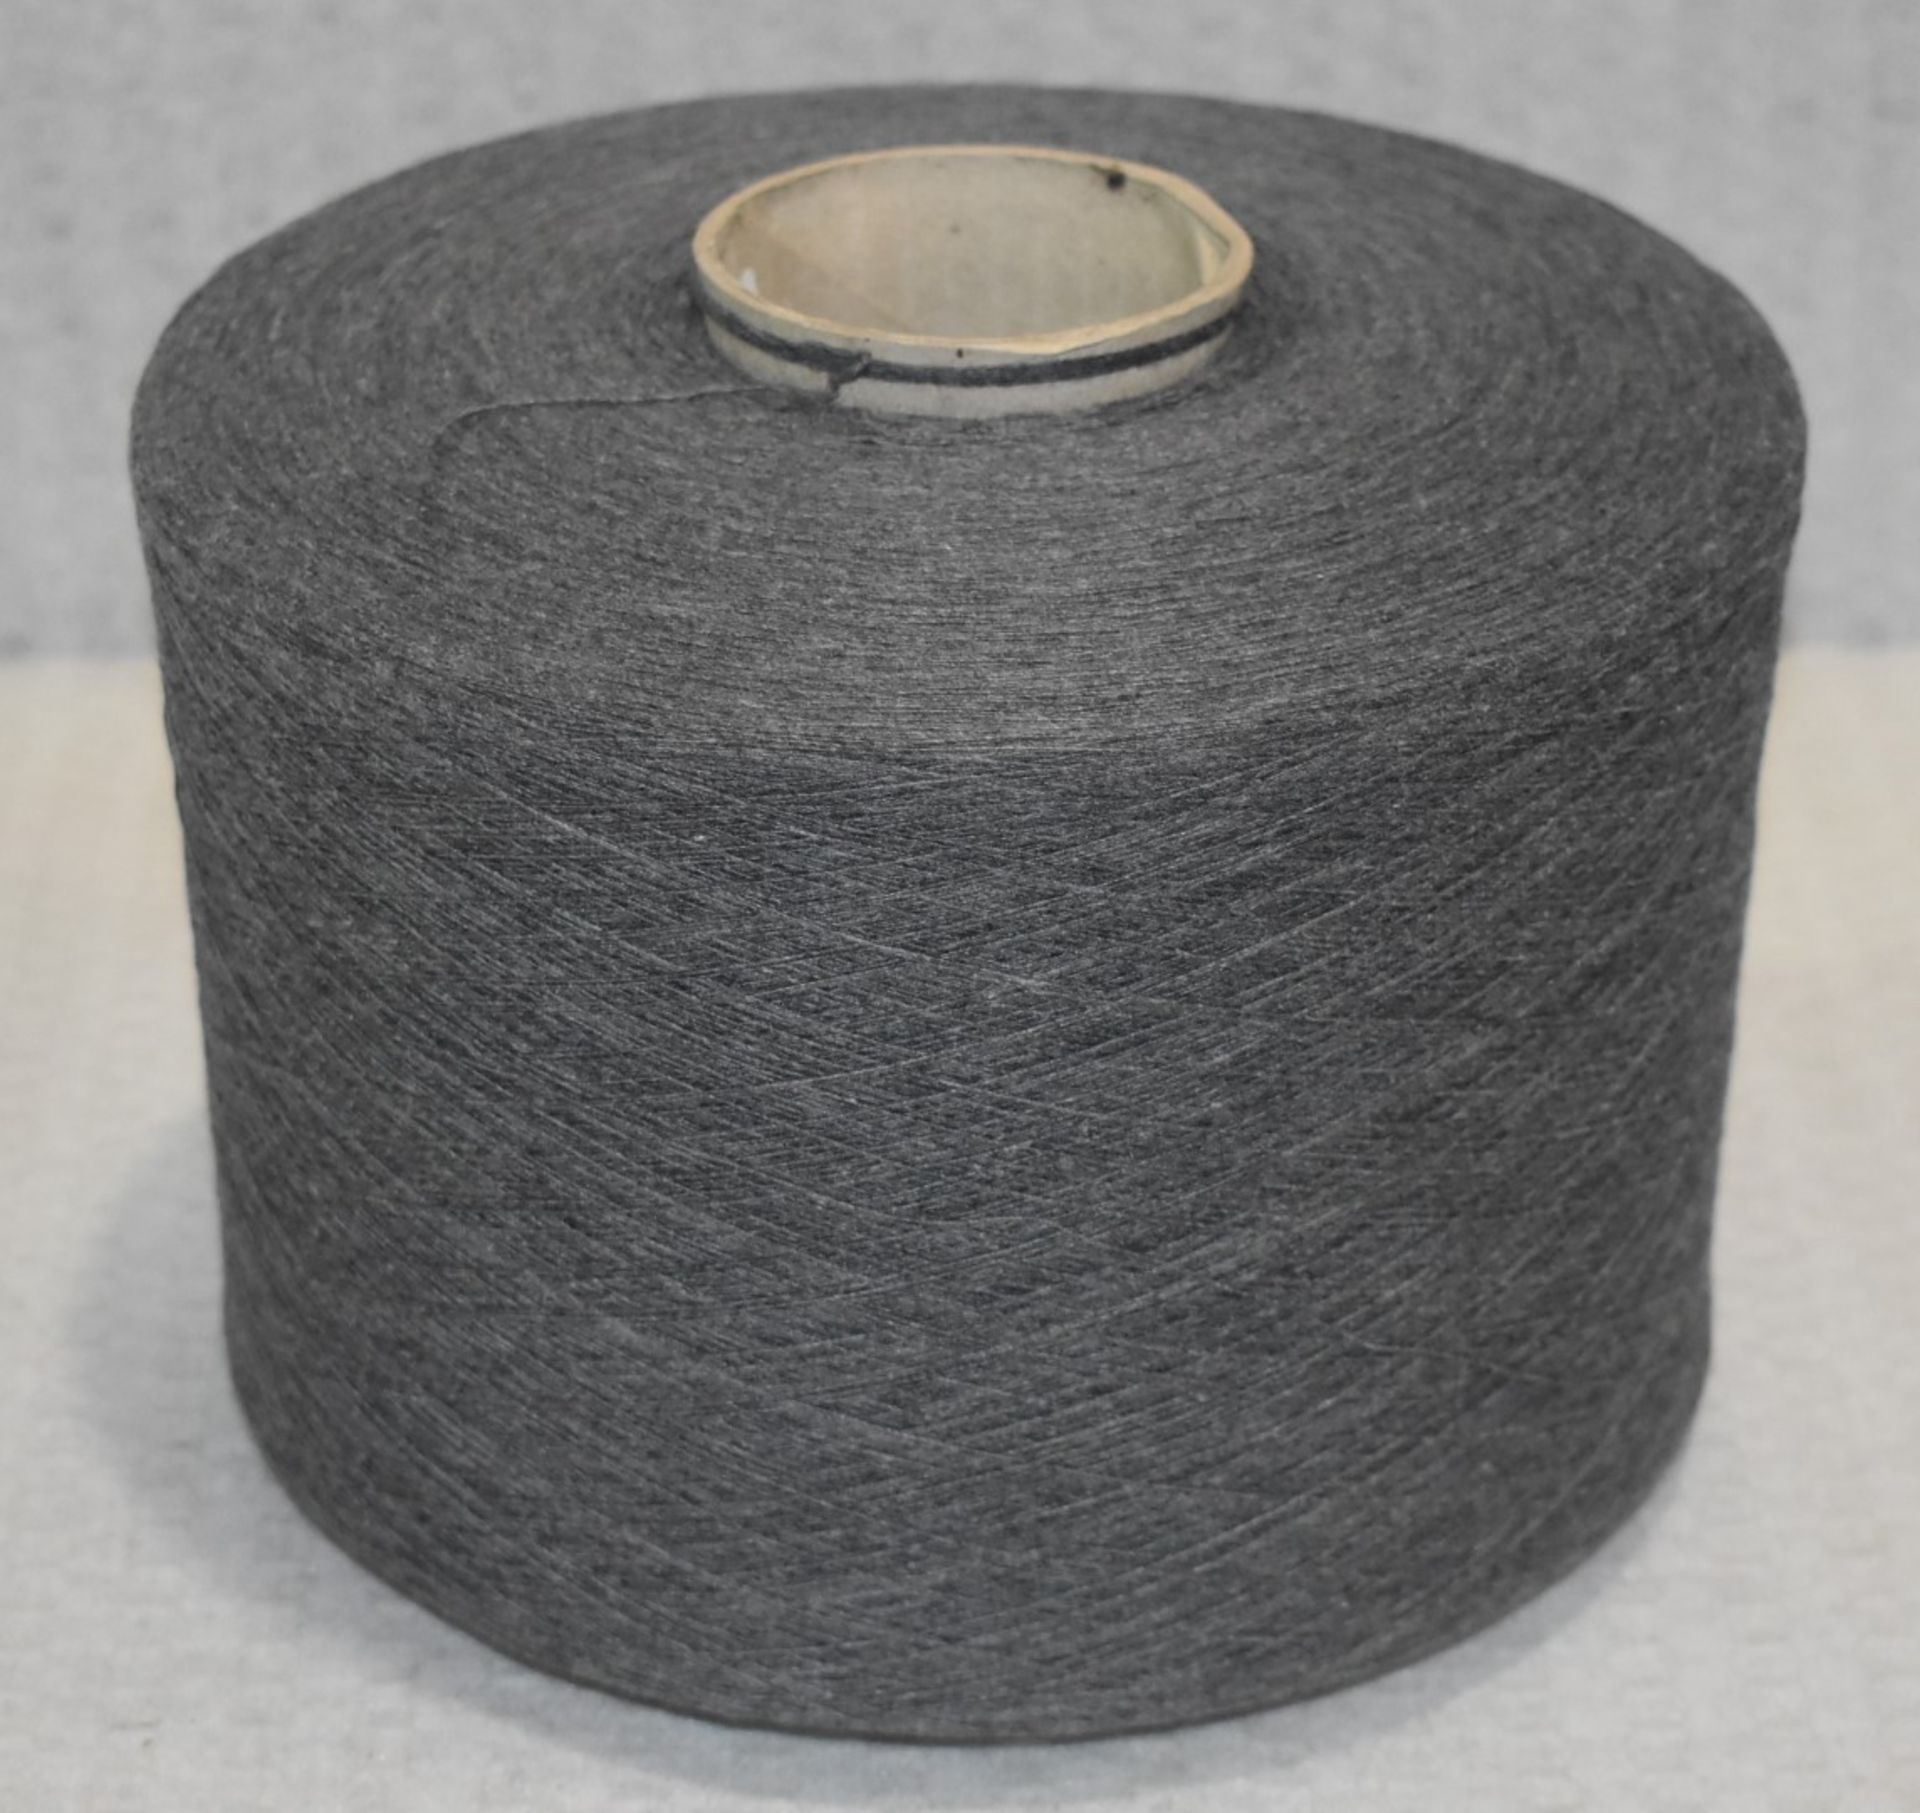 18 x Cones of 1/13 MicroCotton Knitting Yarn - Mid Grey - Approx Weight: 2,500g - New Stock ABL Yarn - Image 8 of 11